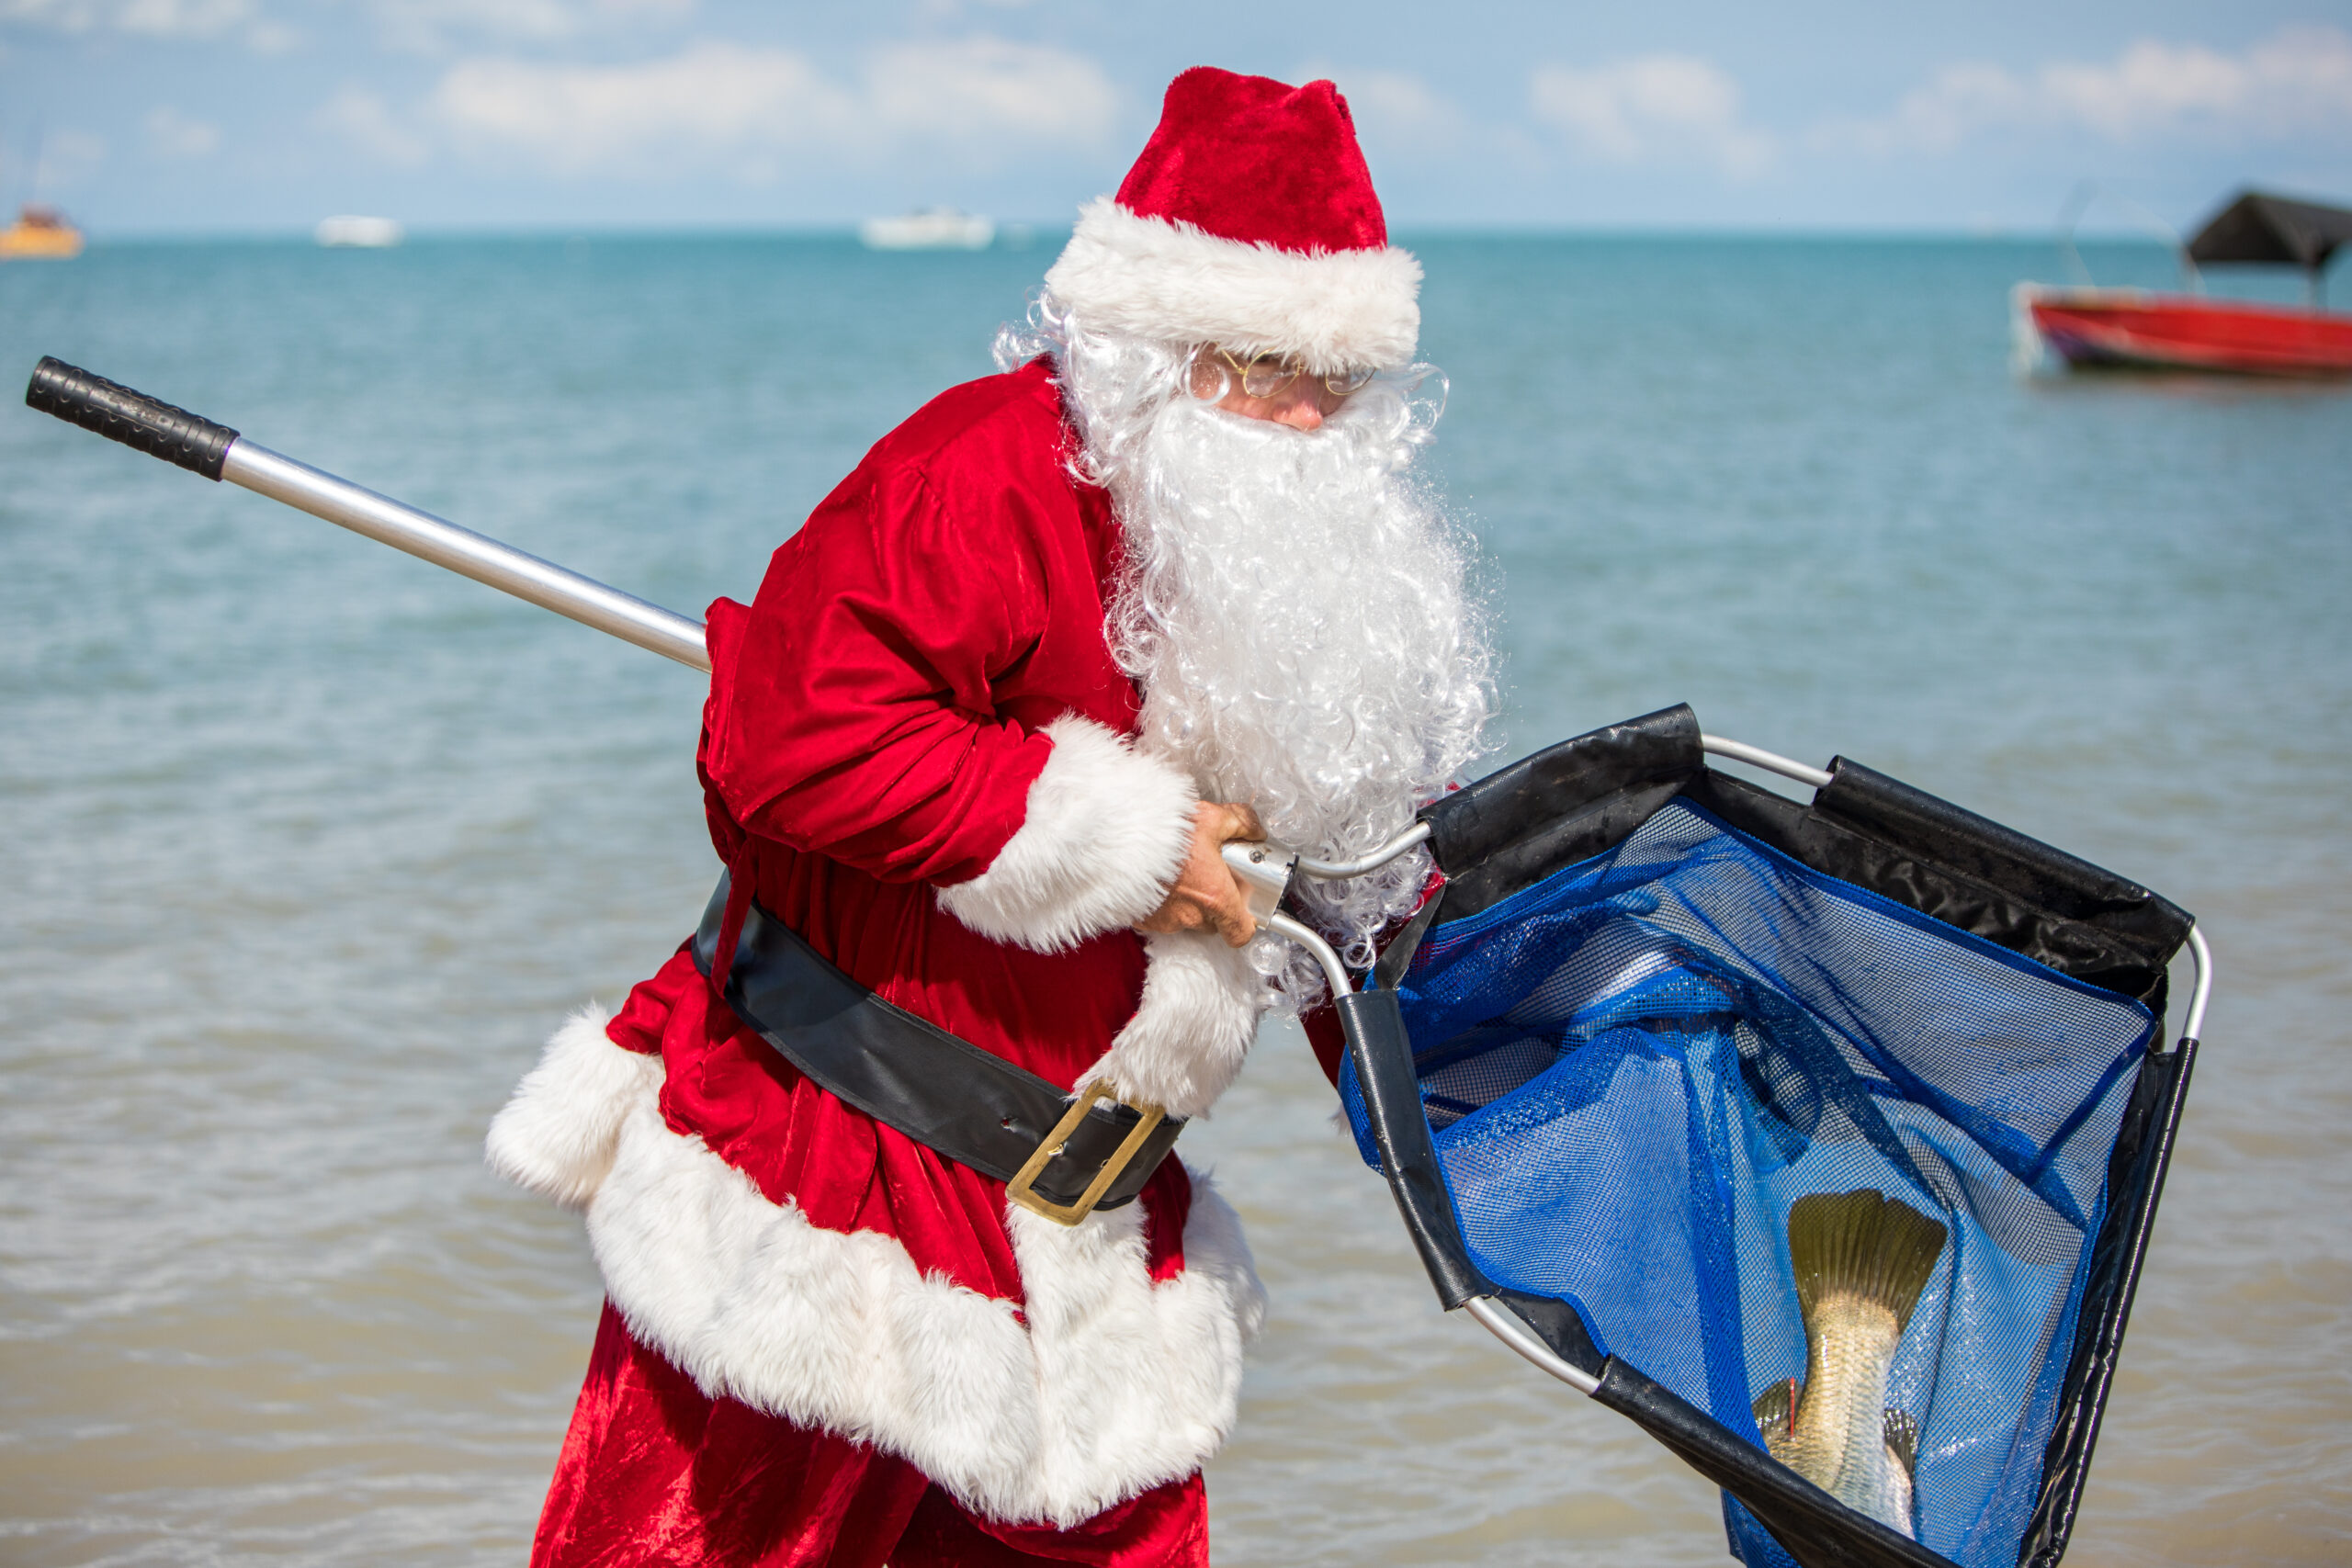 Fishmas will deliver on the ultimate Christmas wish-list,